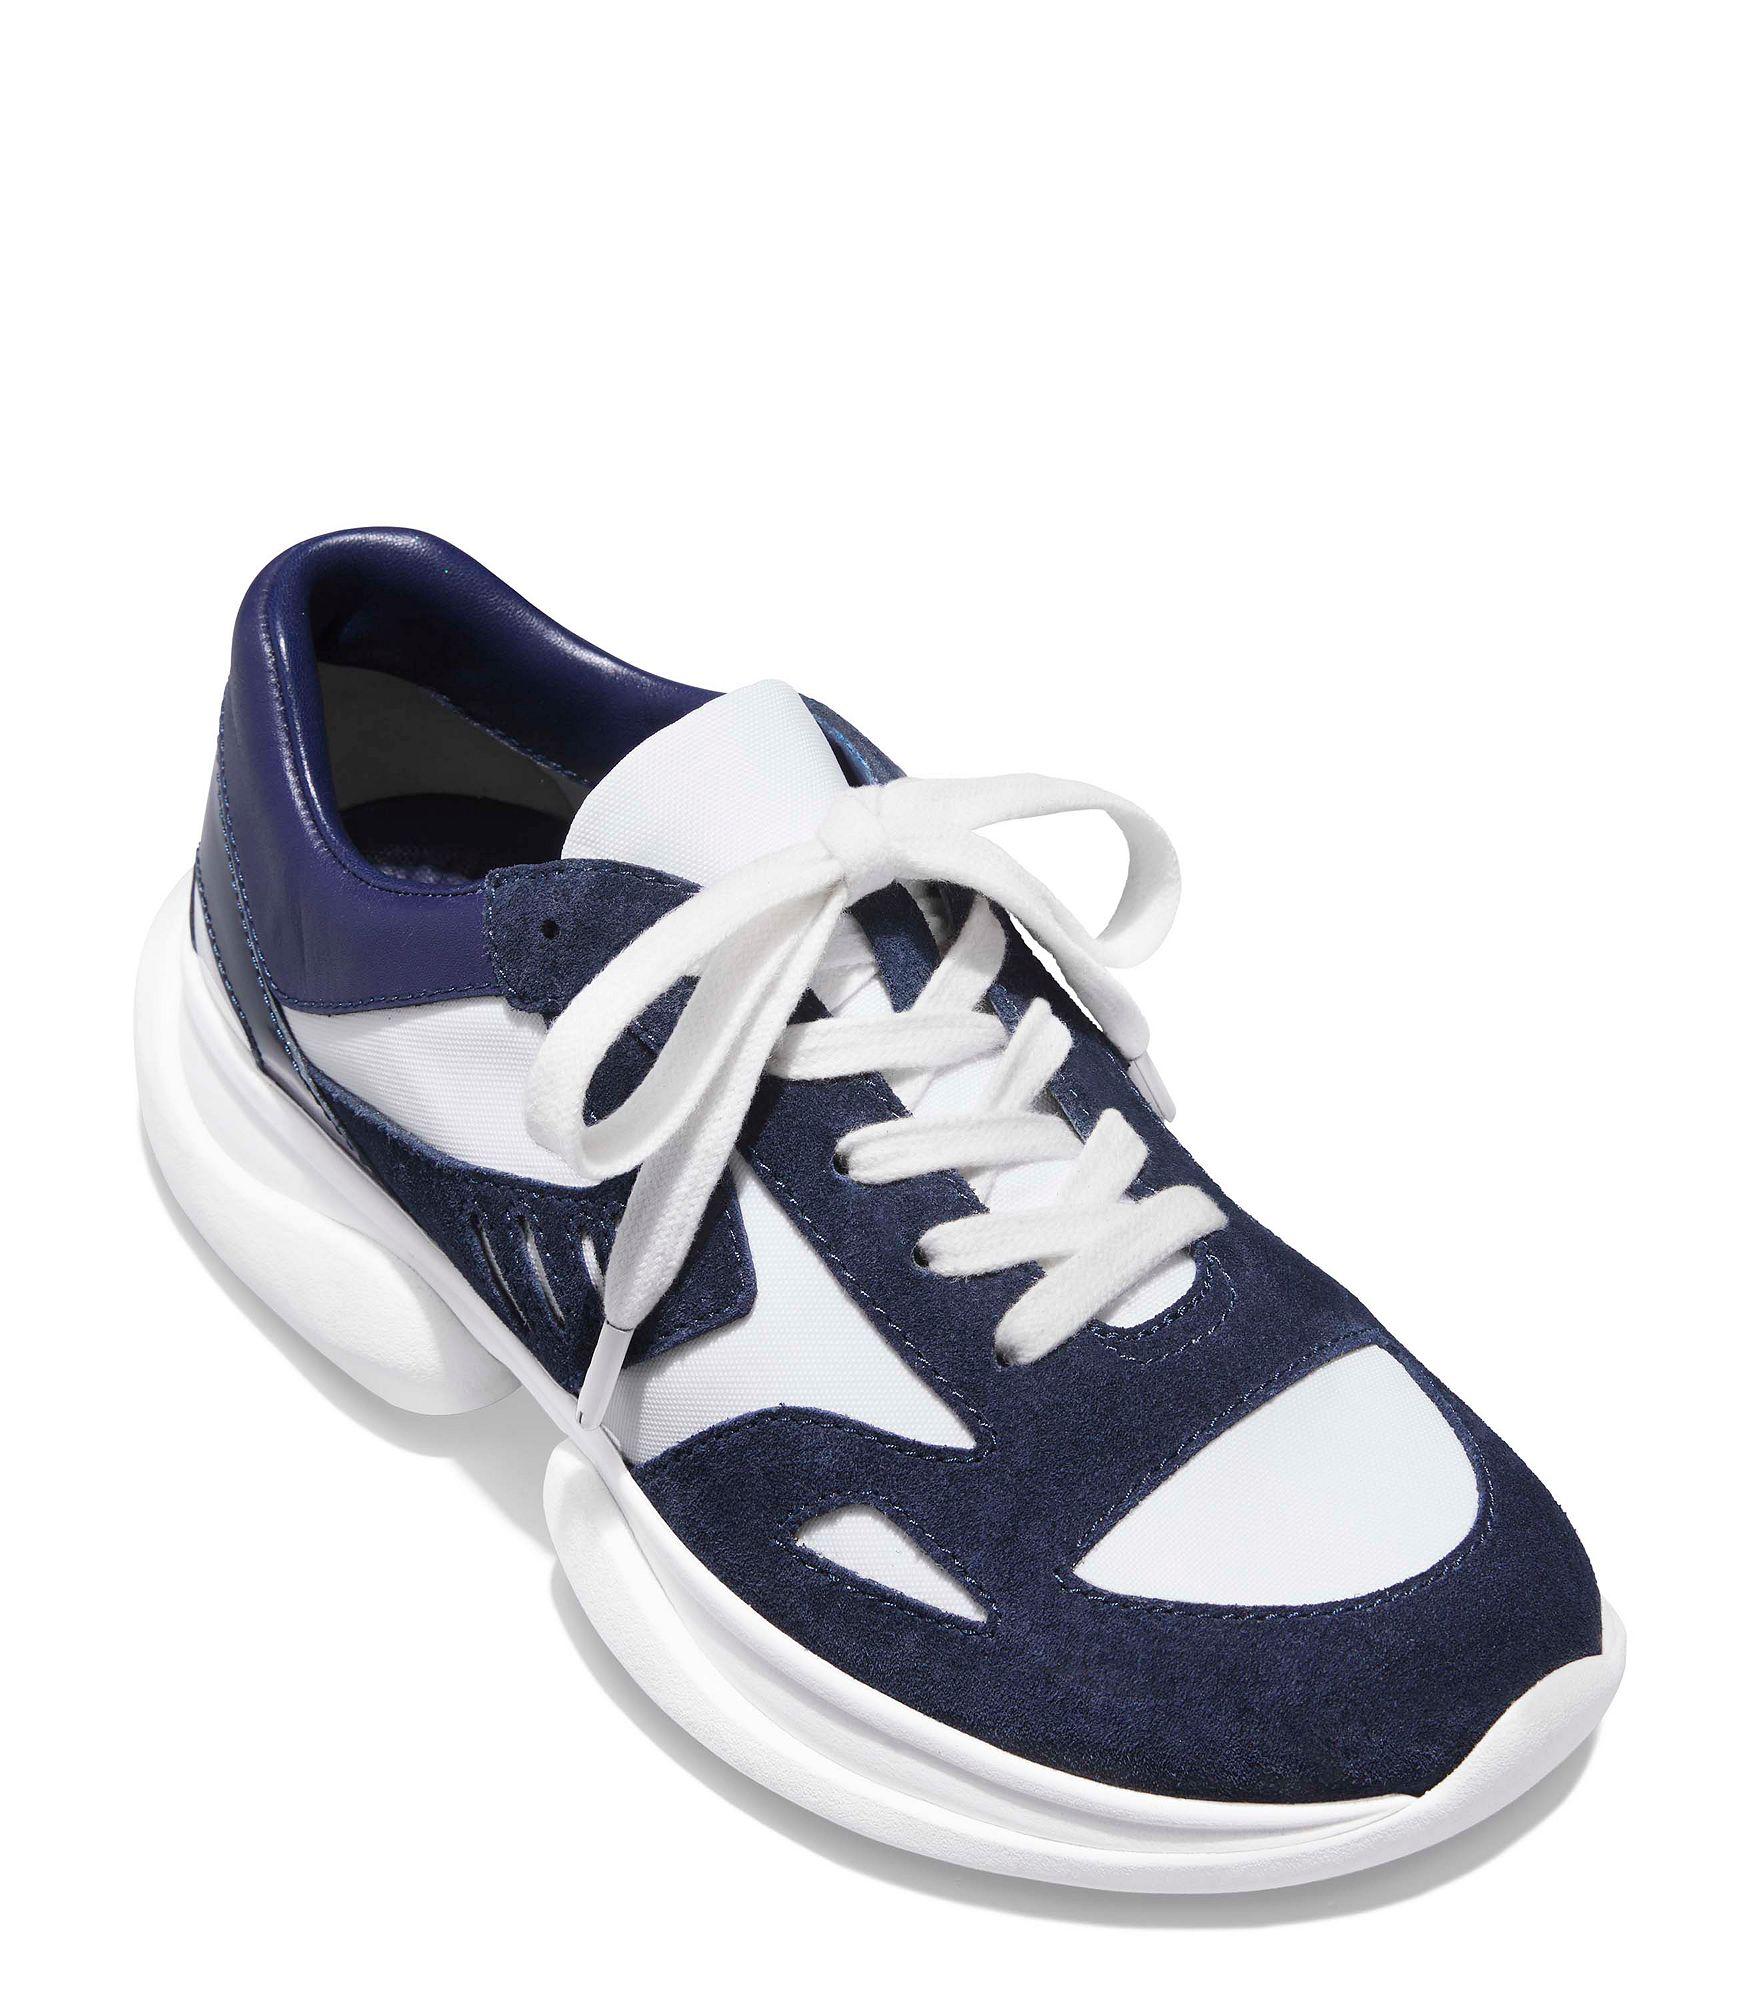 Tory Sport Leather Bubble Lace-up Suede Sneakers in Blue - Lyst